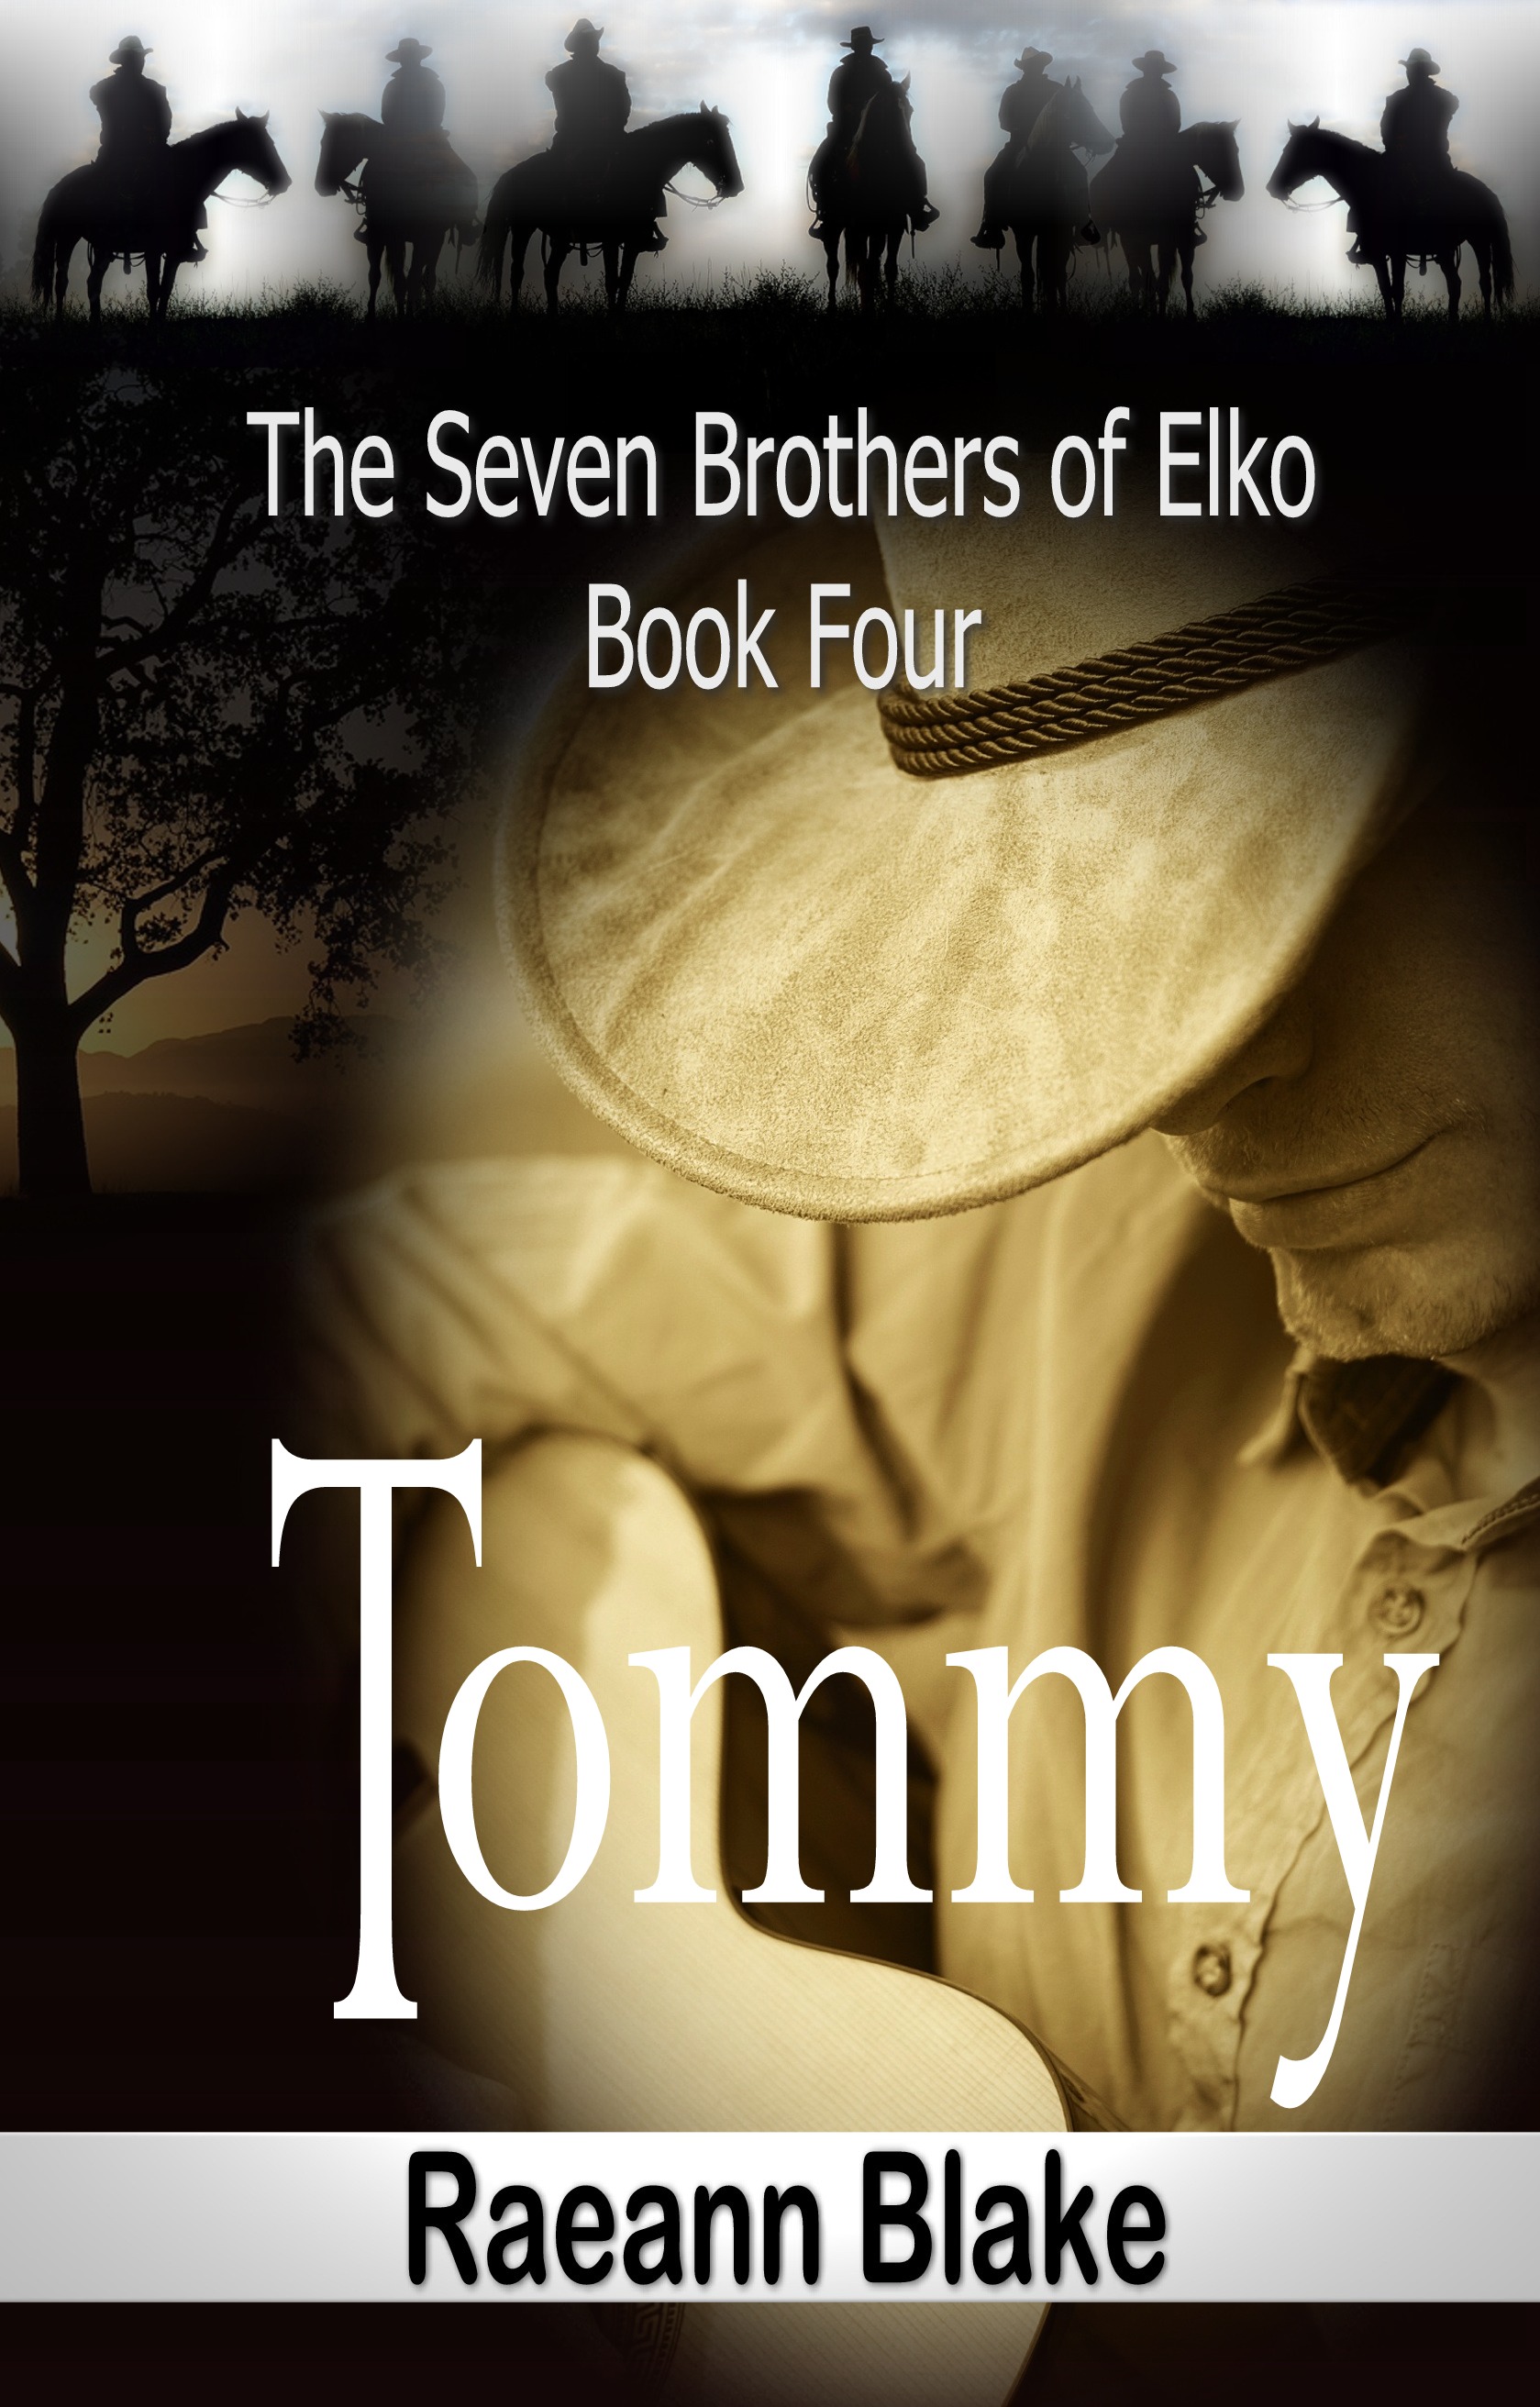 The Seven Brothers of Elko - Tommy